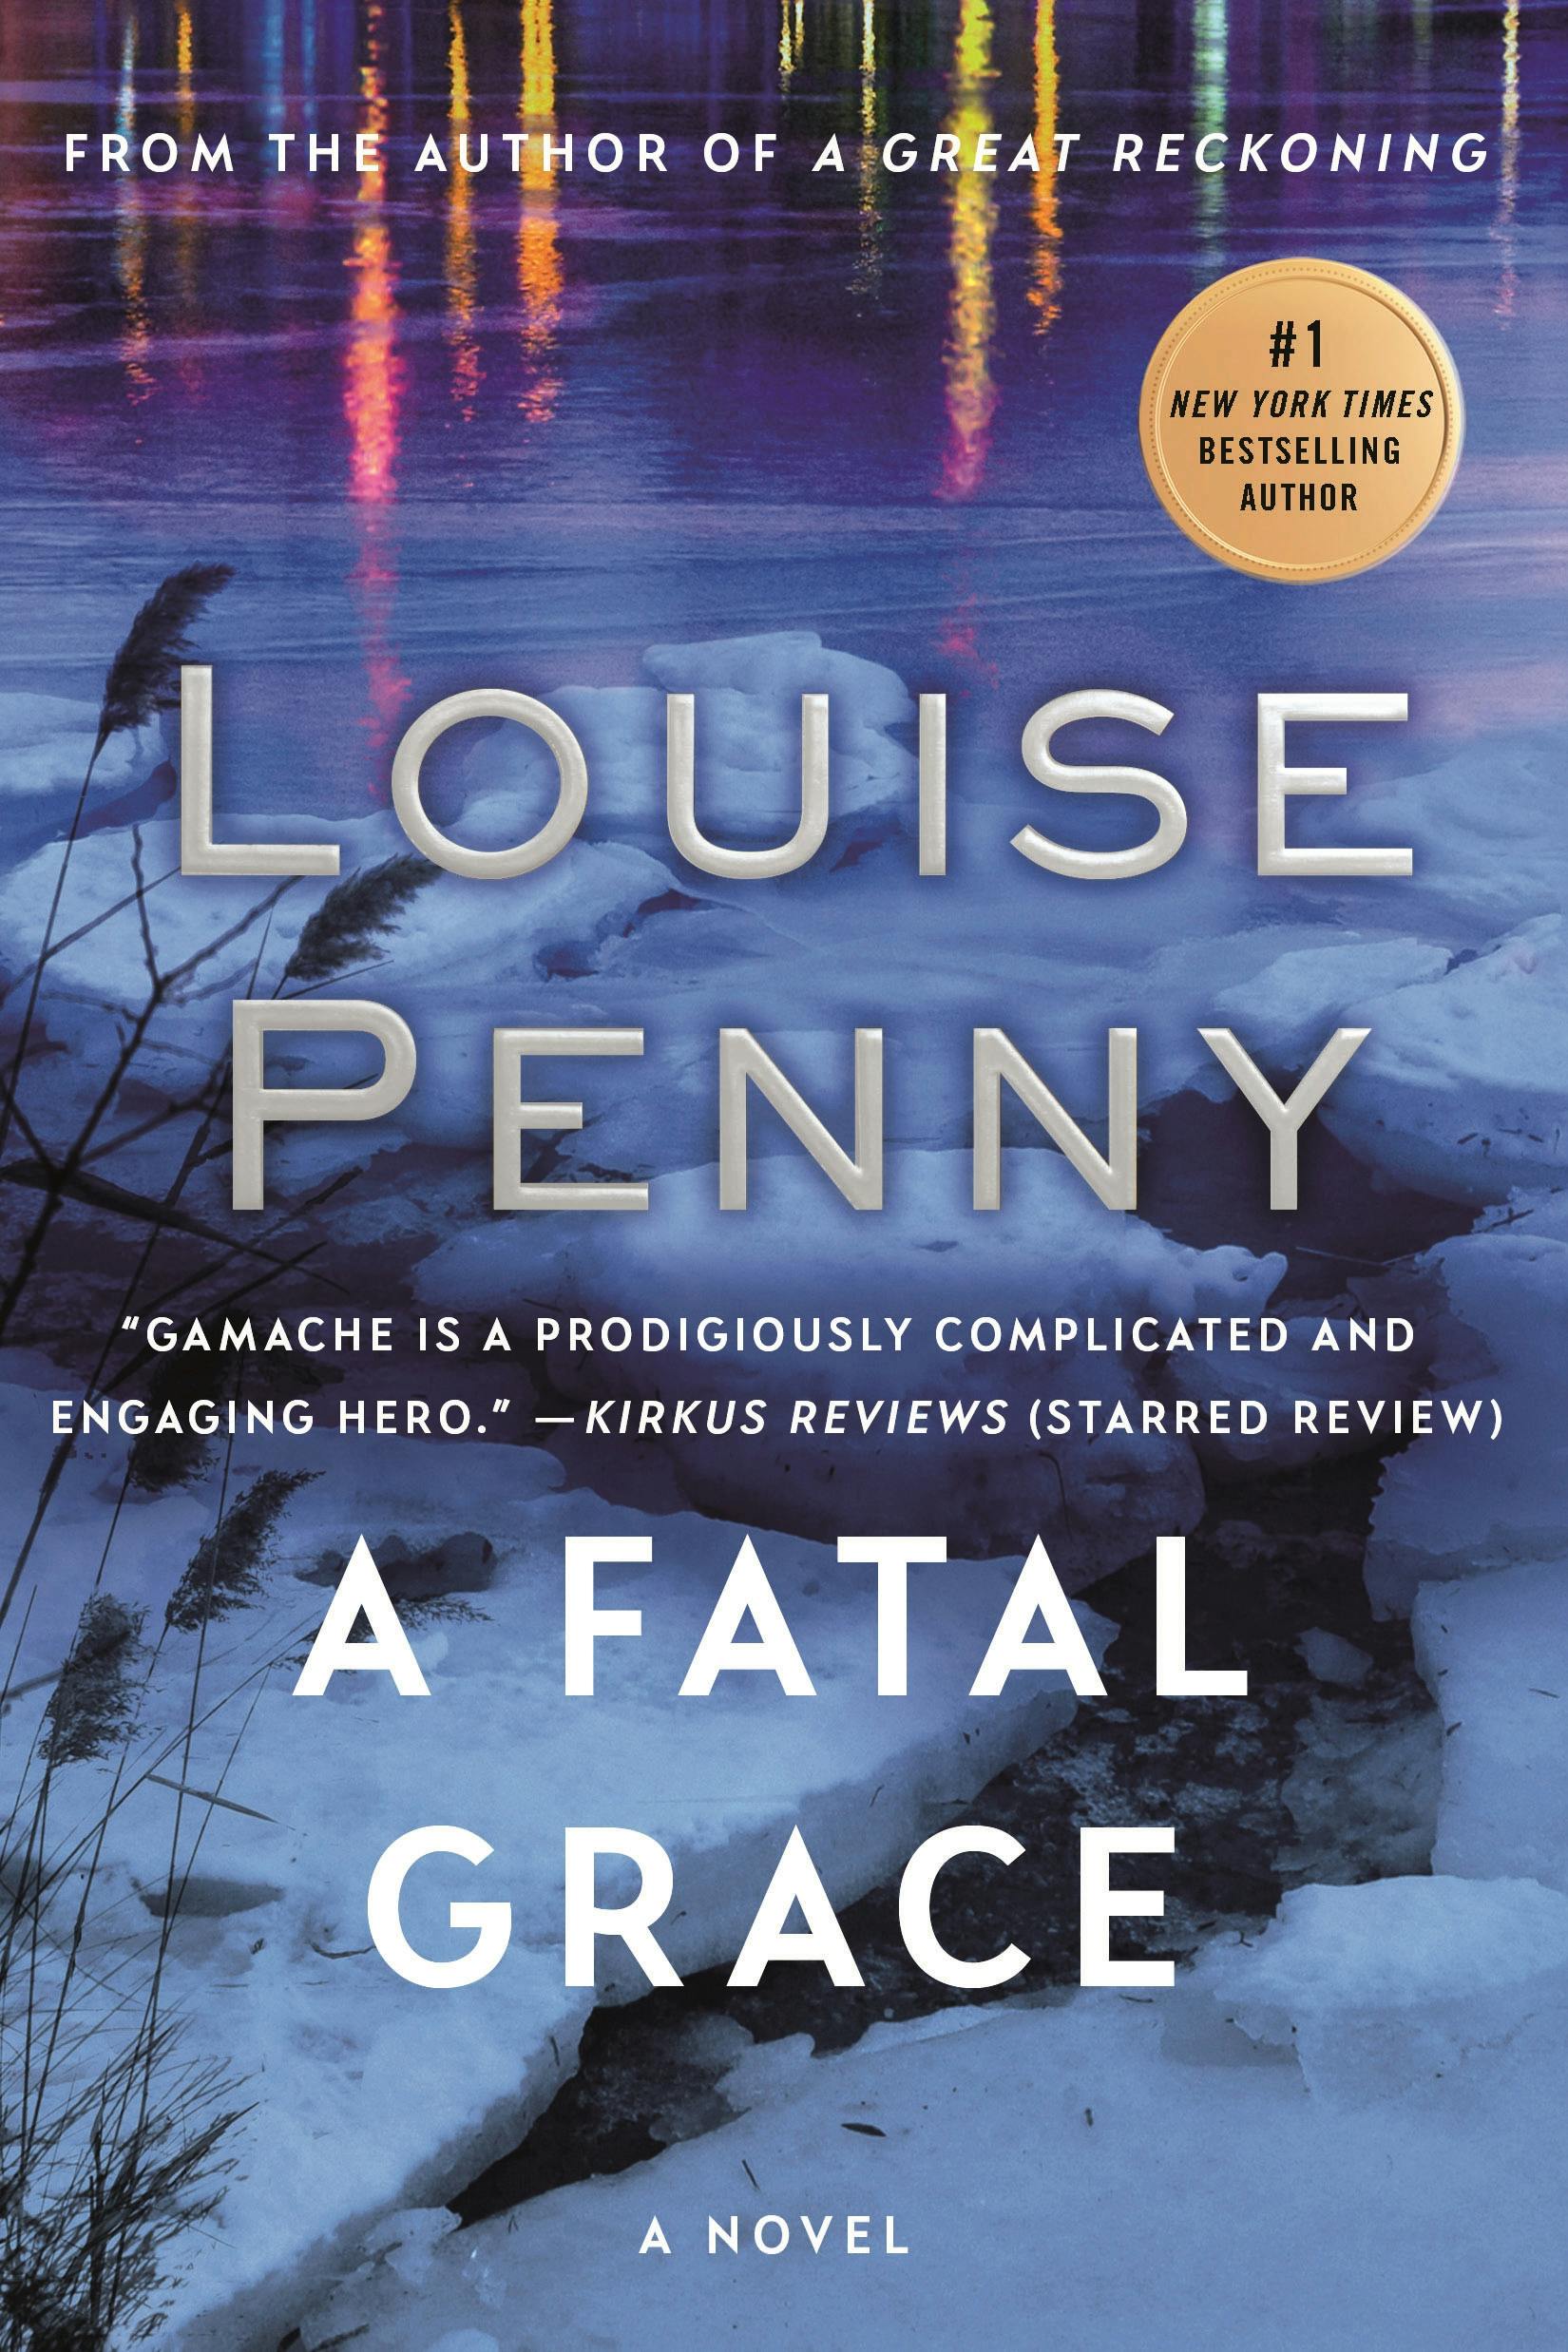 Series to Savour 8 – Louise Penny's Armand Gamache mysteries